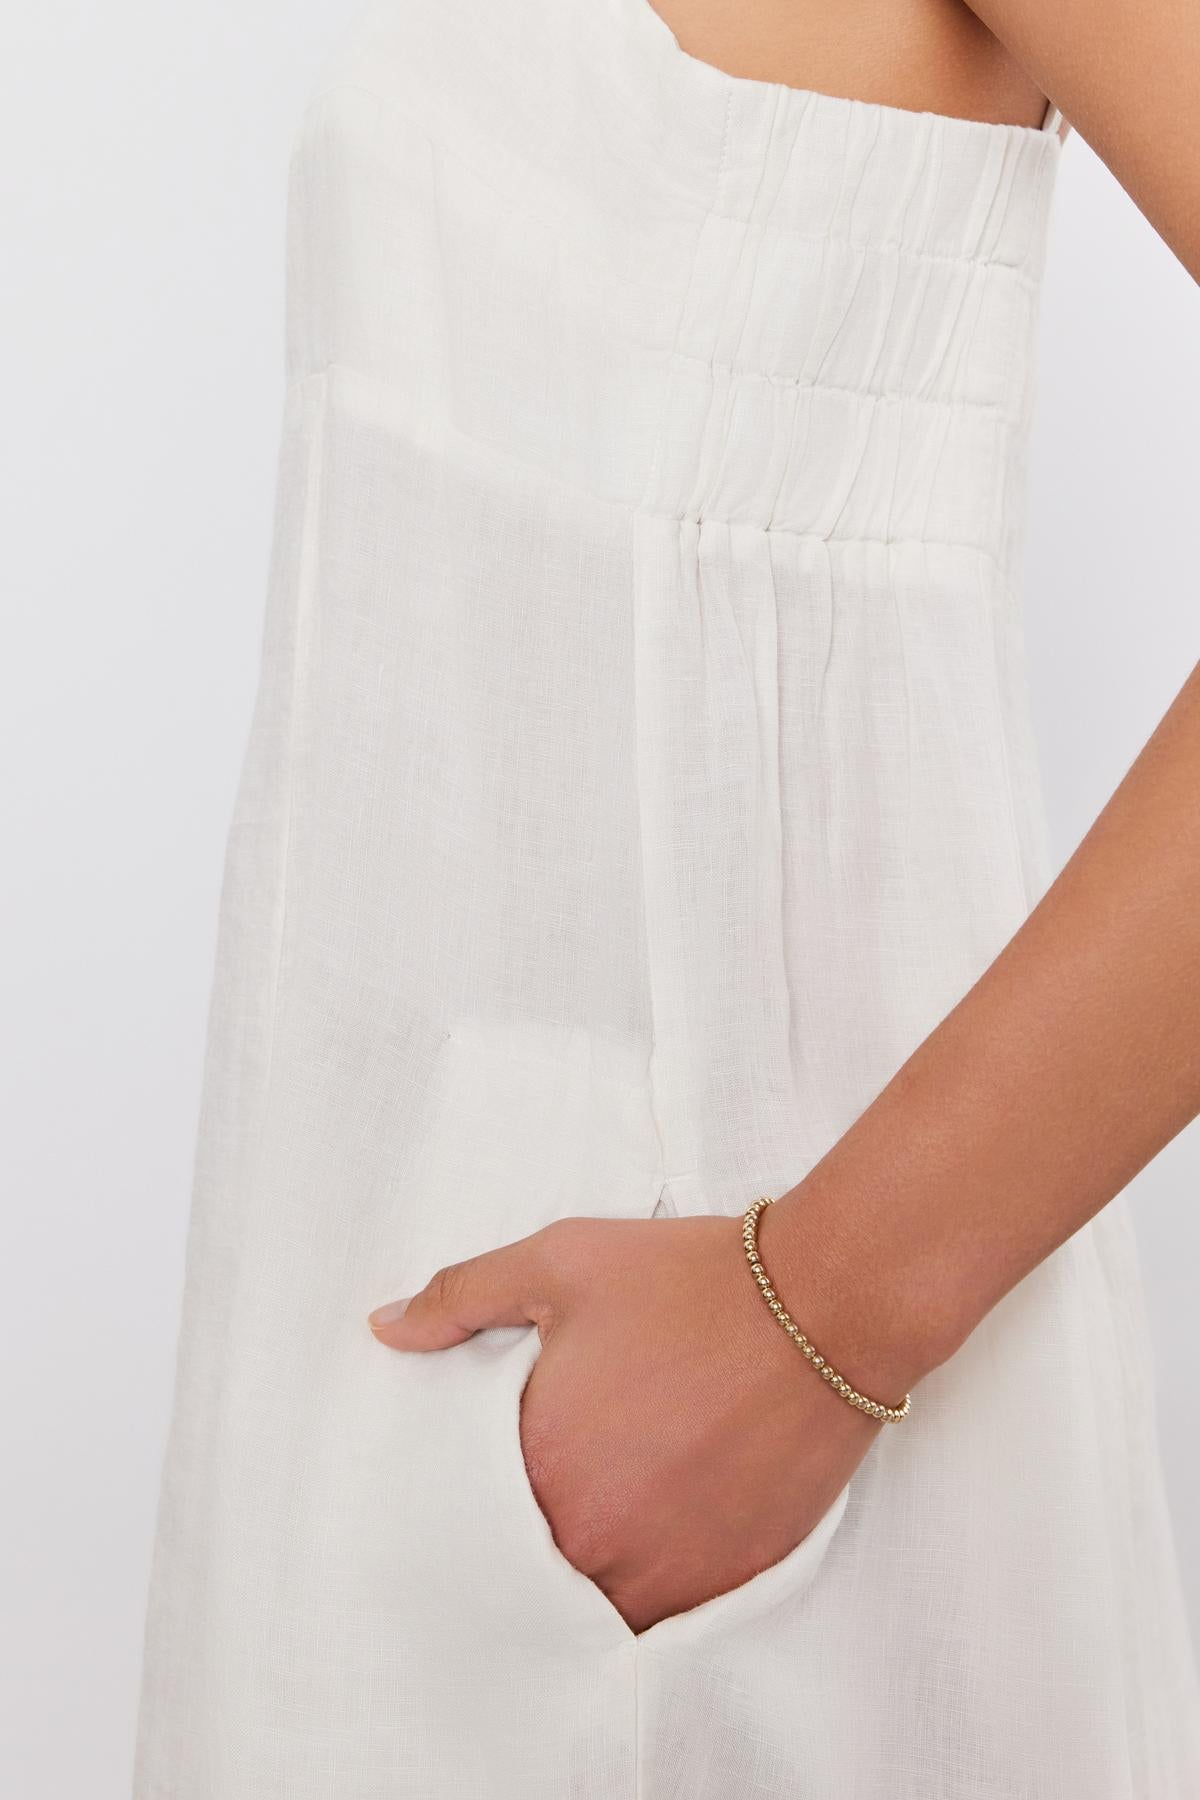 Close-up of a woman's side, wearing a white sleeveless STEPHIE LINEN DRESS with pleated details, focusing on her hand adorned with a gold bracelet by Velvet by Graham & Spencer.-36752945053889